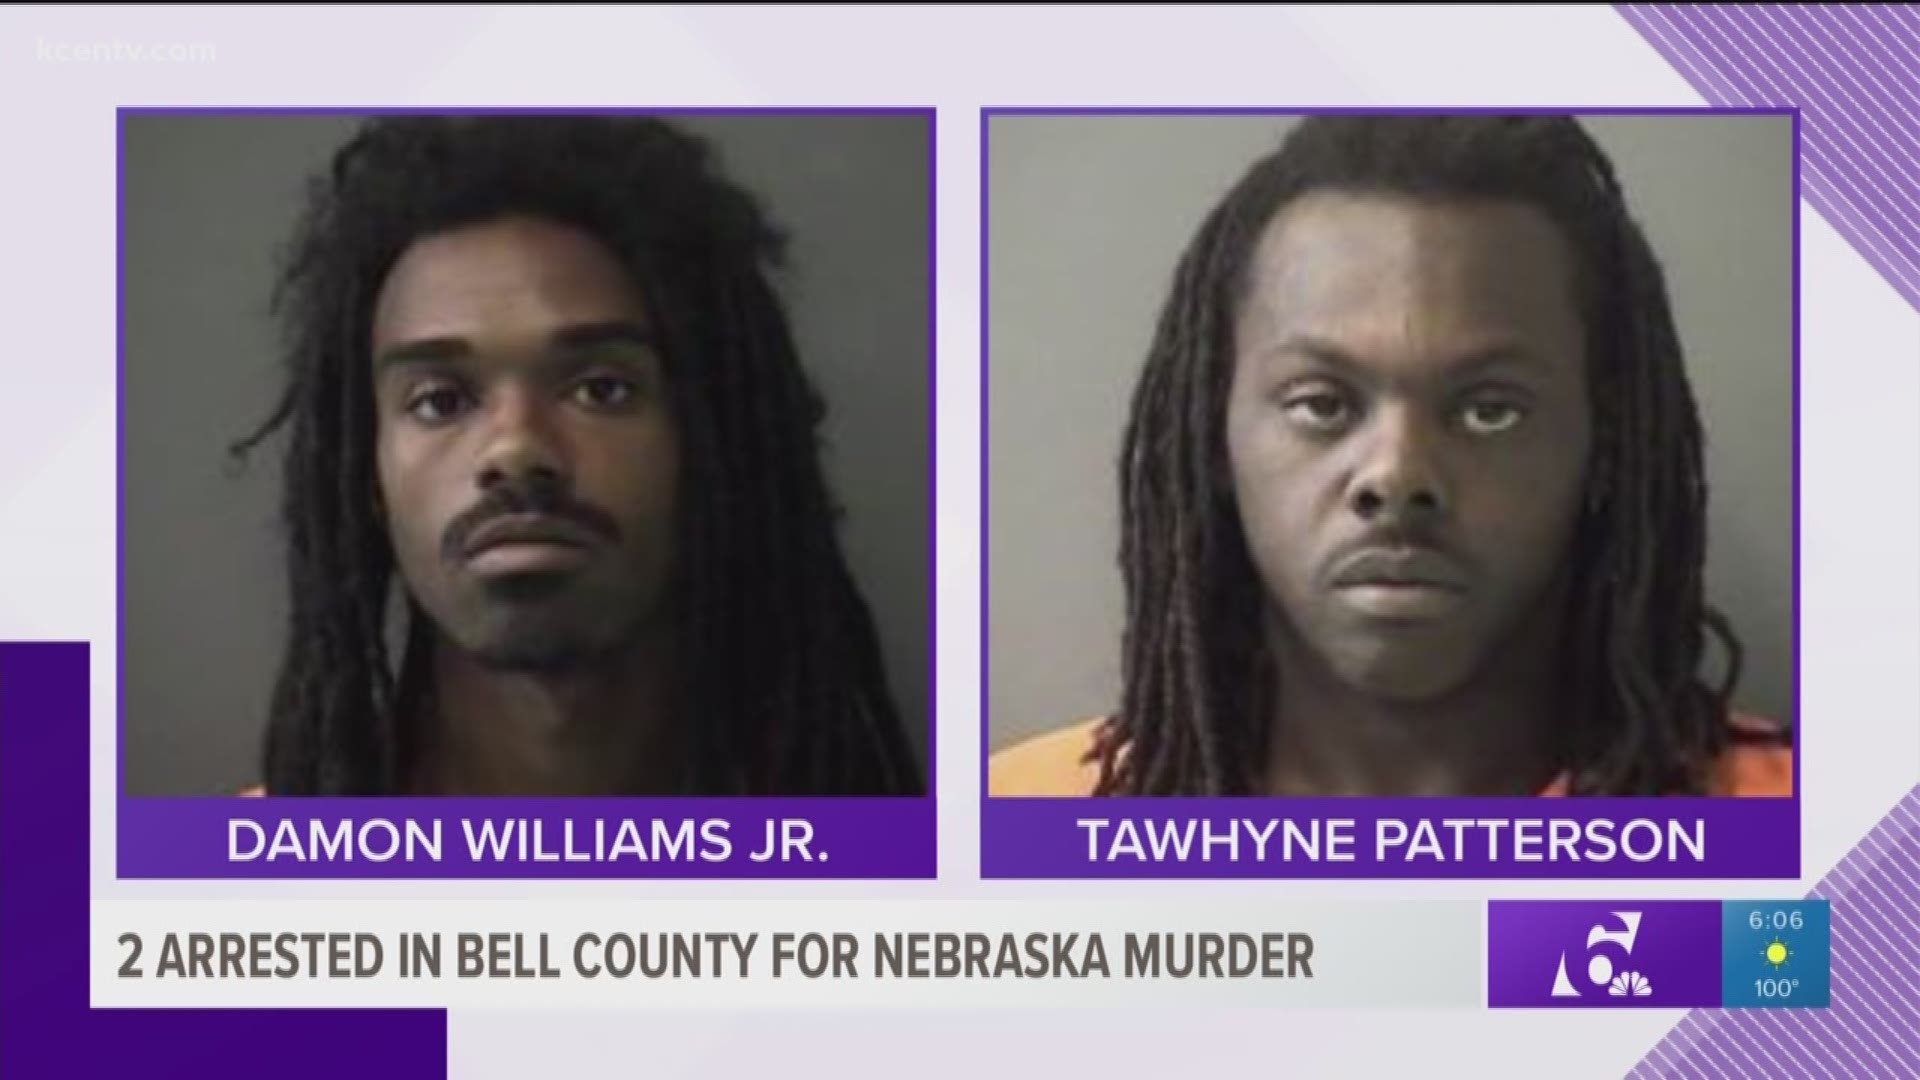 Two men wanted for the murder of a 36-year-old woman in Nebraska were arrested in Bell County.